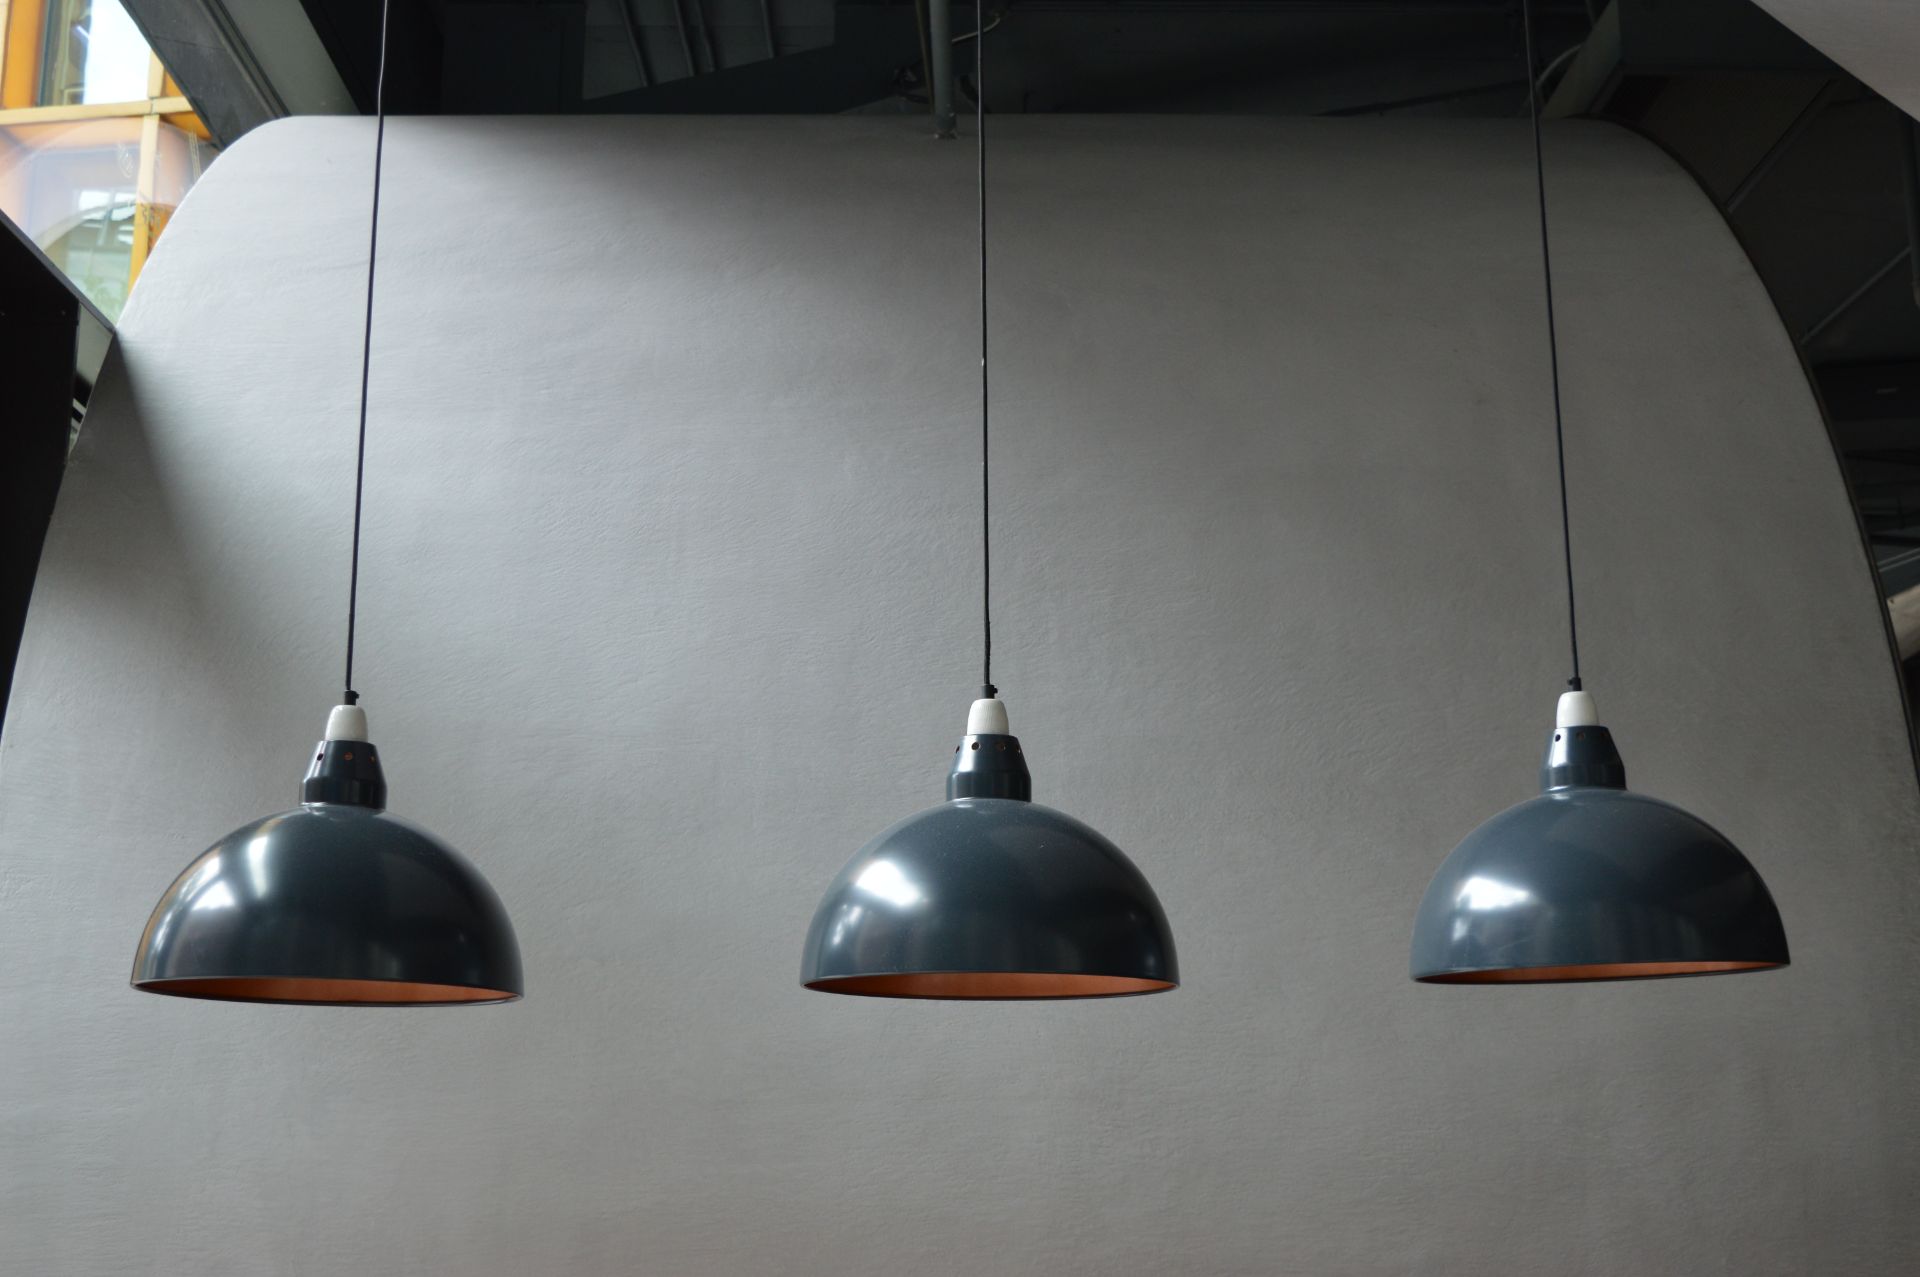 4 x Dome Pendant Ceiling Light Fittings - Grey and Copper - Vintage Style - 40cm Diameter - 250cm